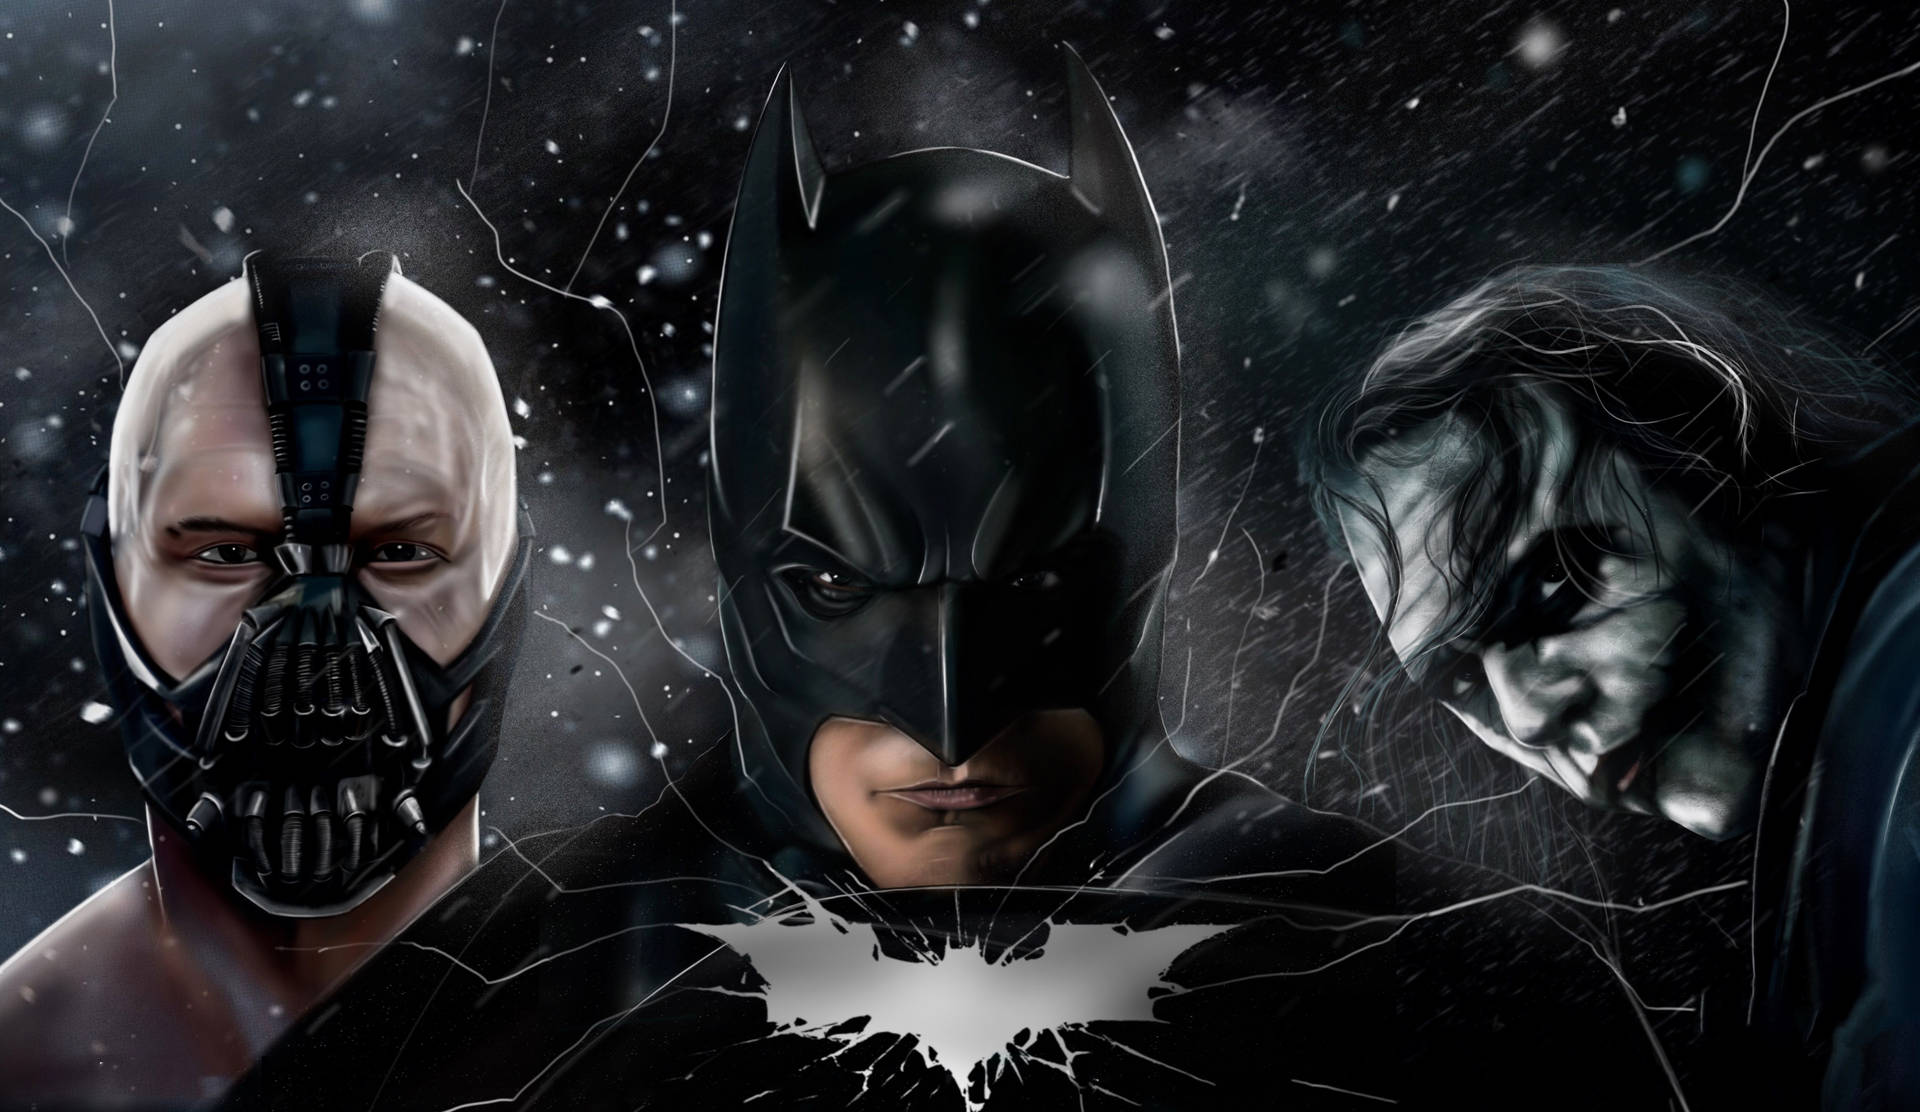 Beating Fear With Courage - Batman, Bane, And The Joker Background